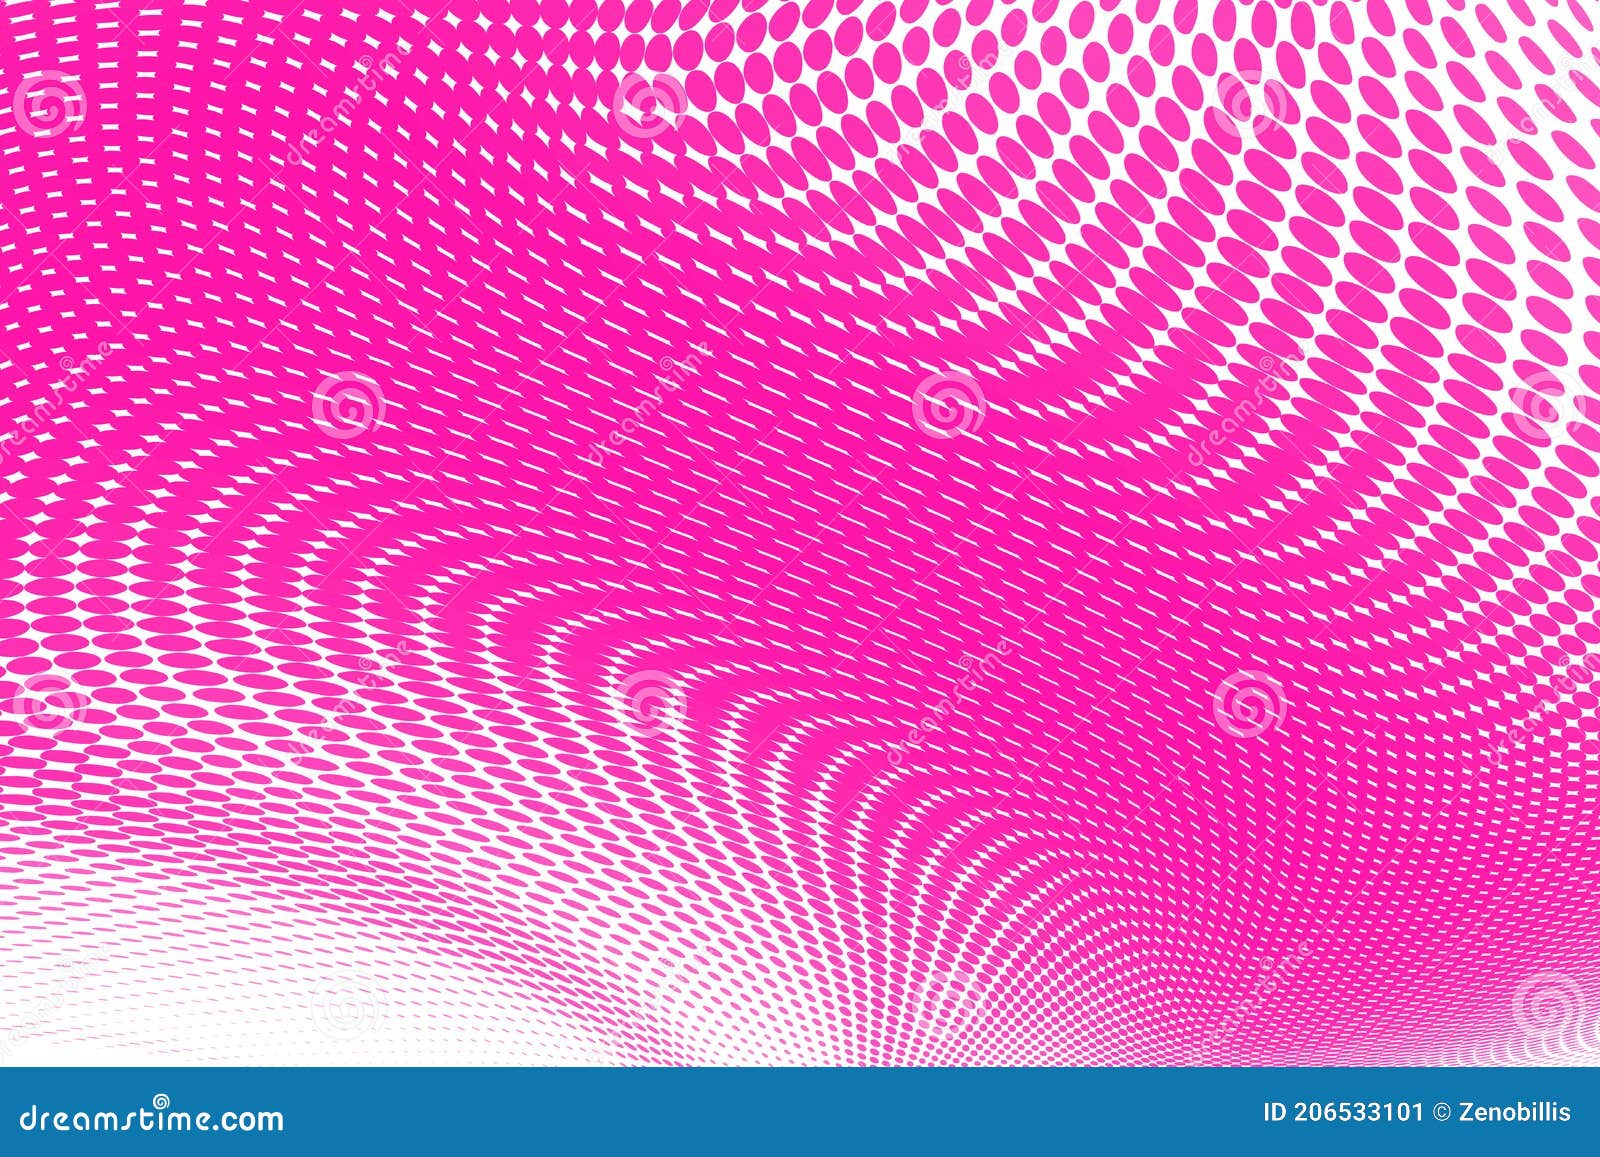 abstract bright pink halftone pattern.  half tone panoramic   with dots